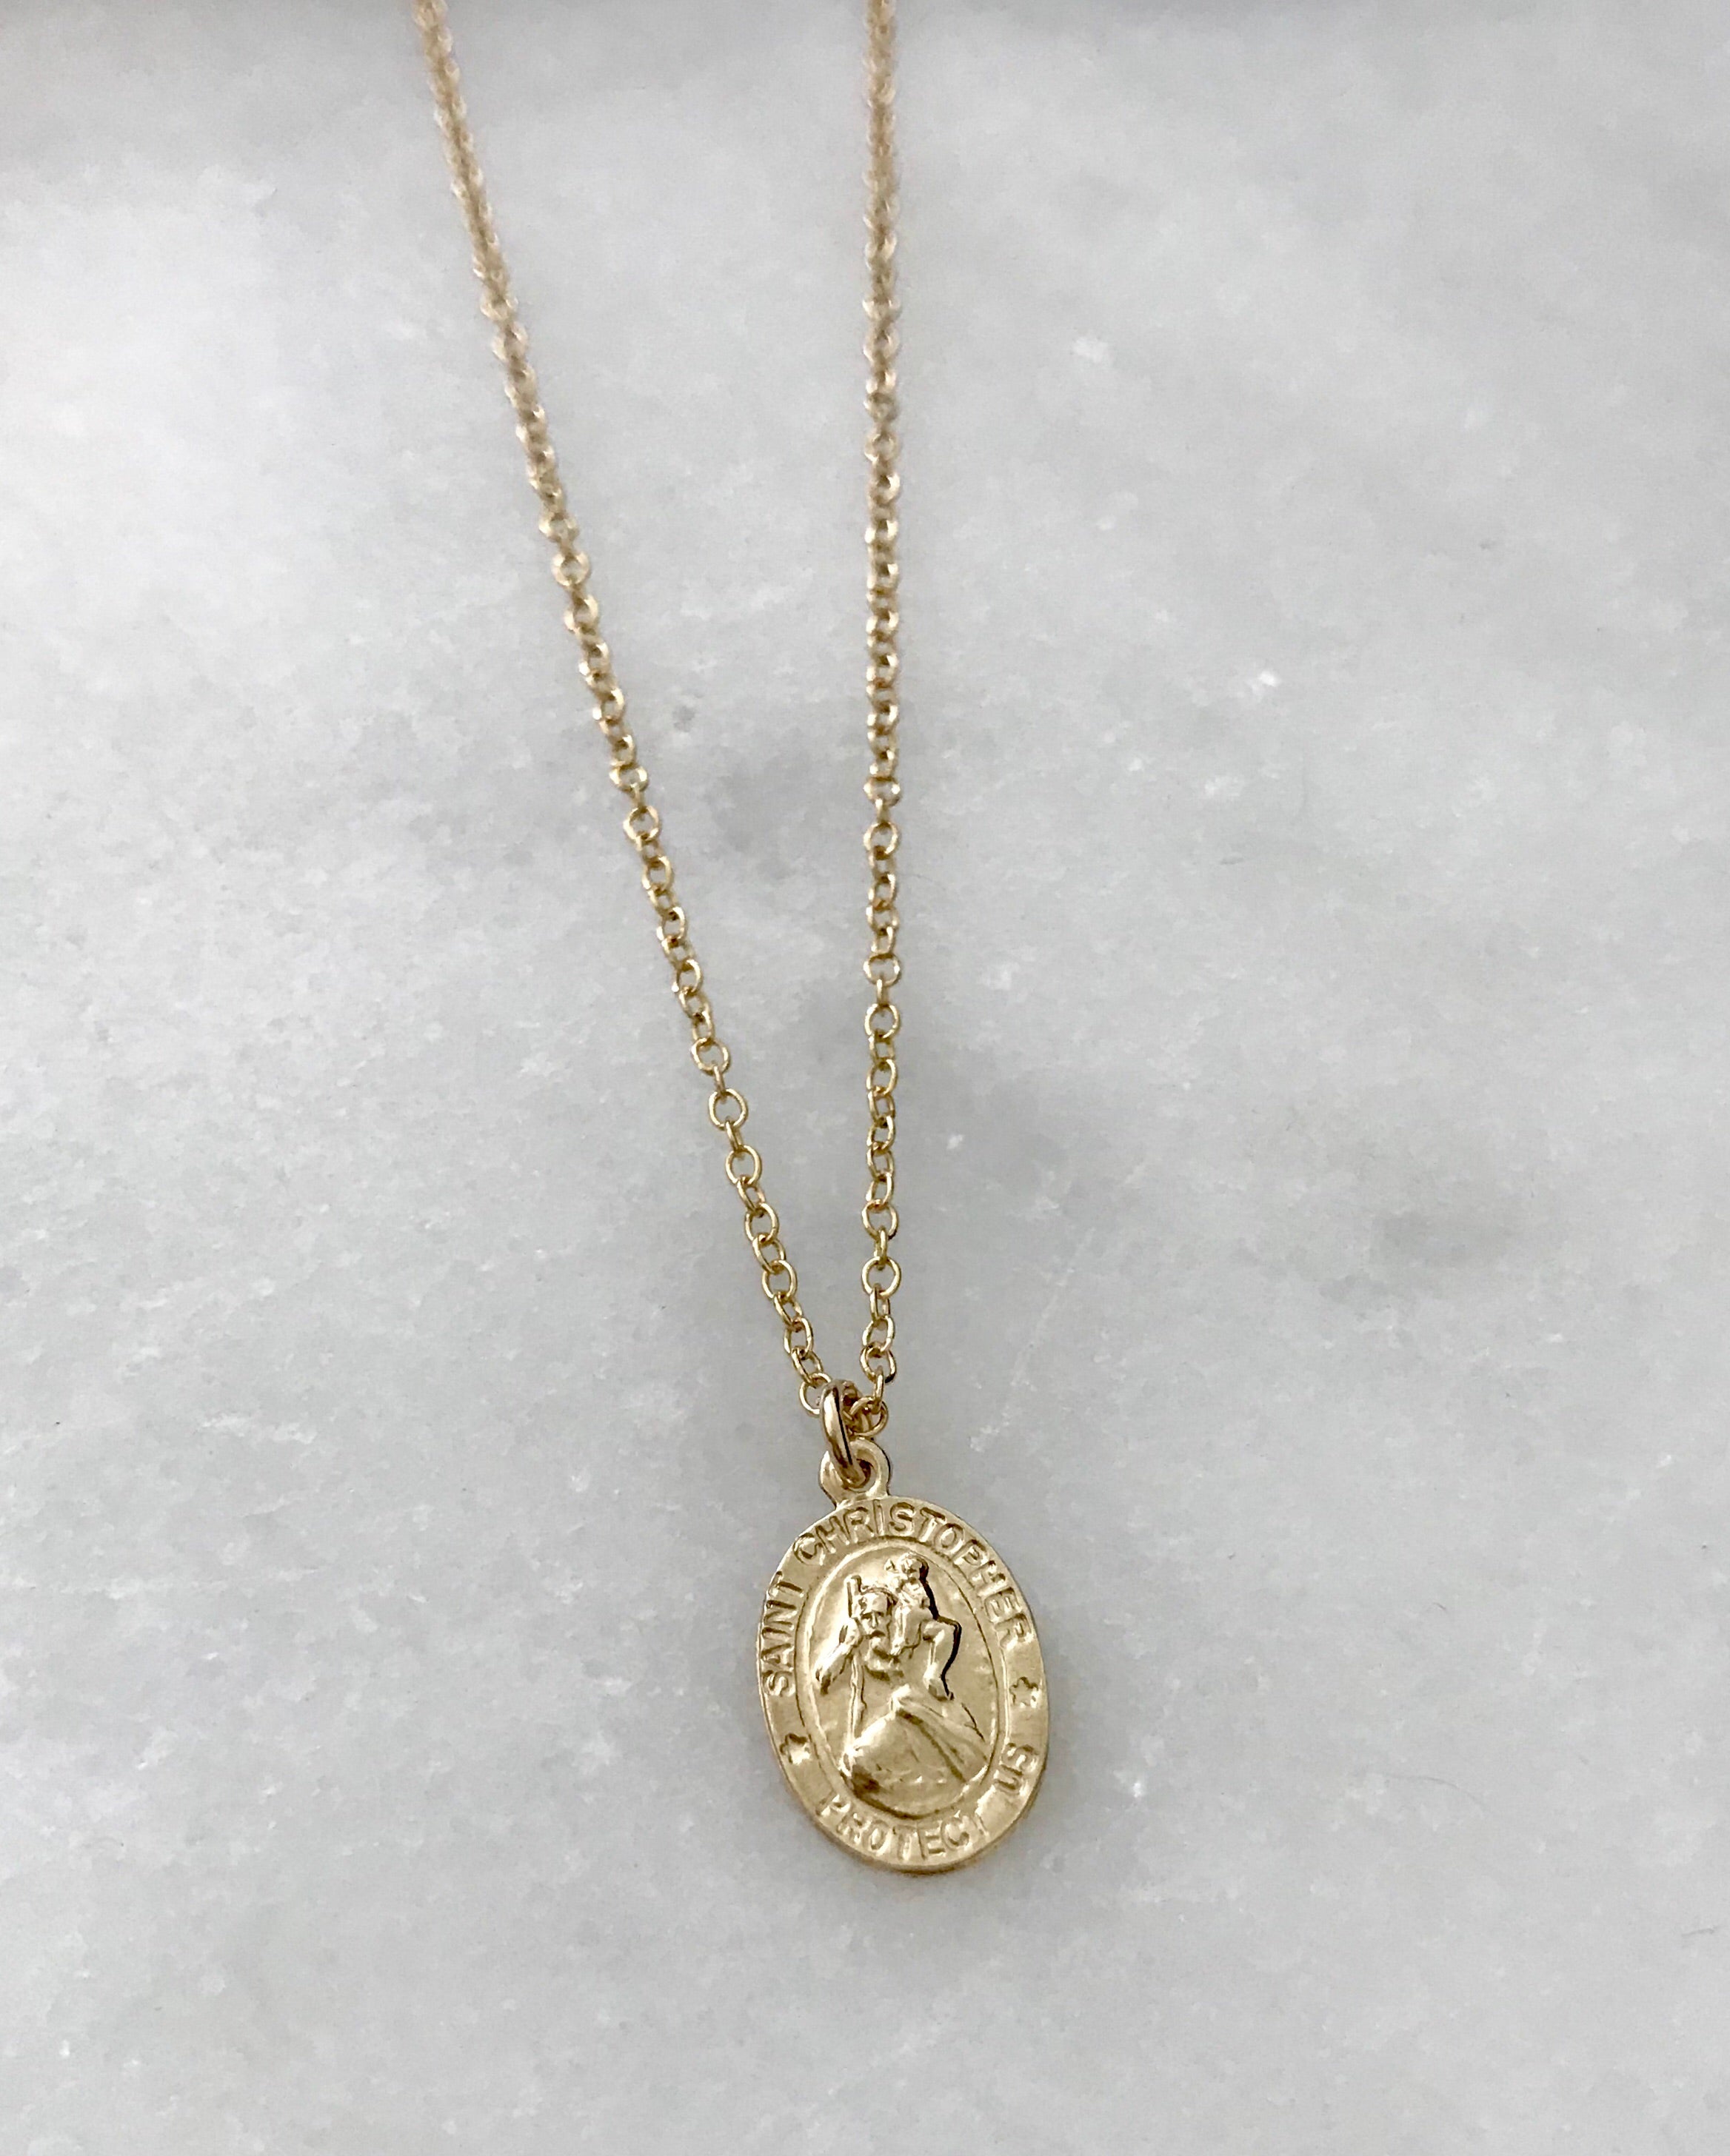 Saint Medal Necklace - Saint Christopher Solid Pendant Necklace With Chains  25mm